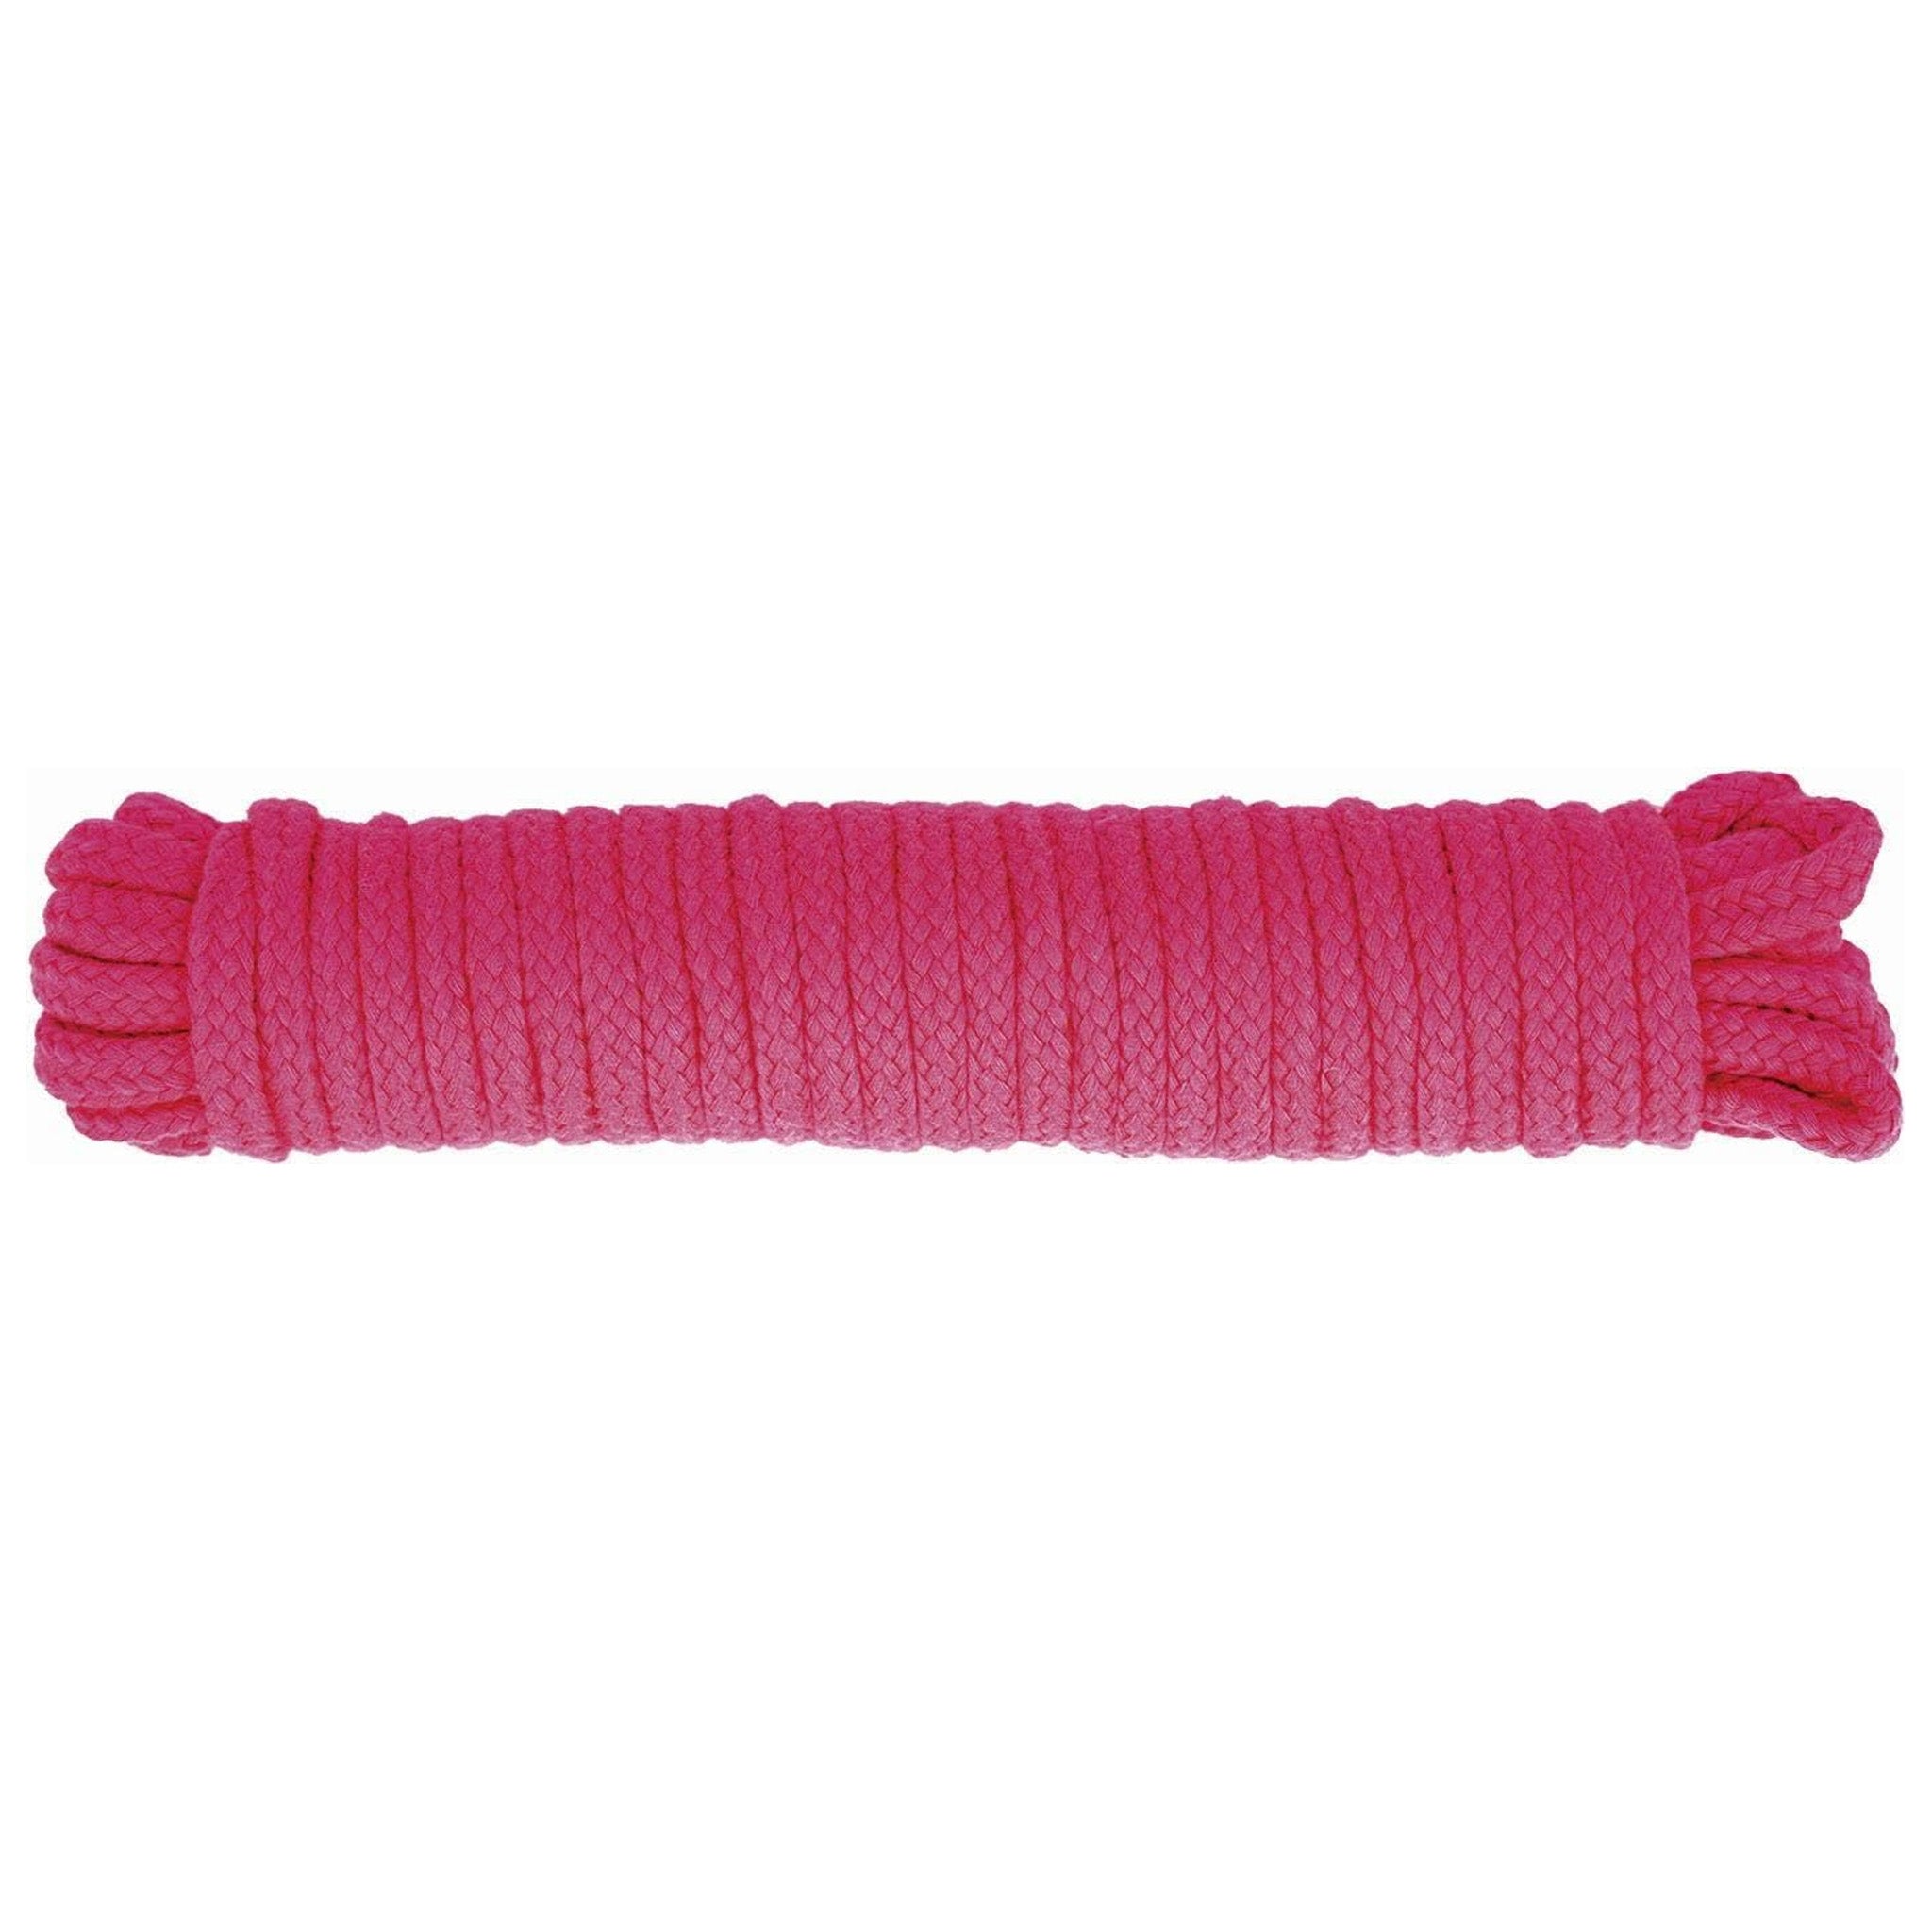 Soft Cotton Rope 33ft